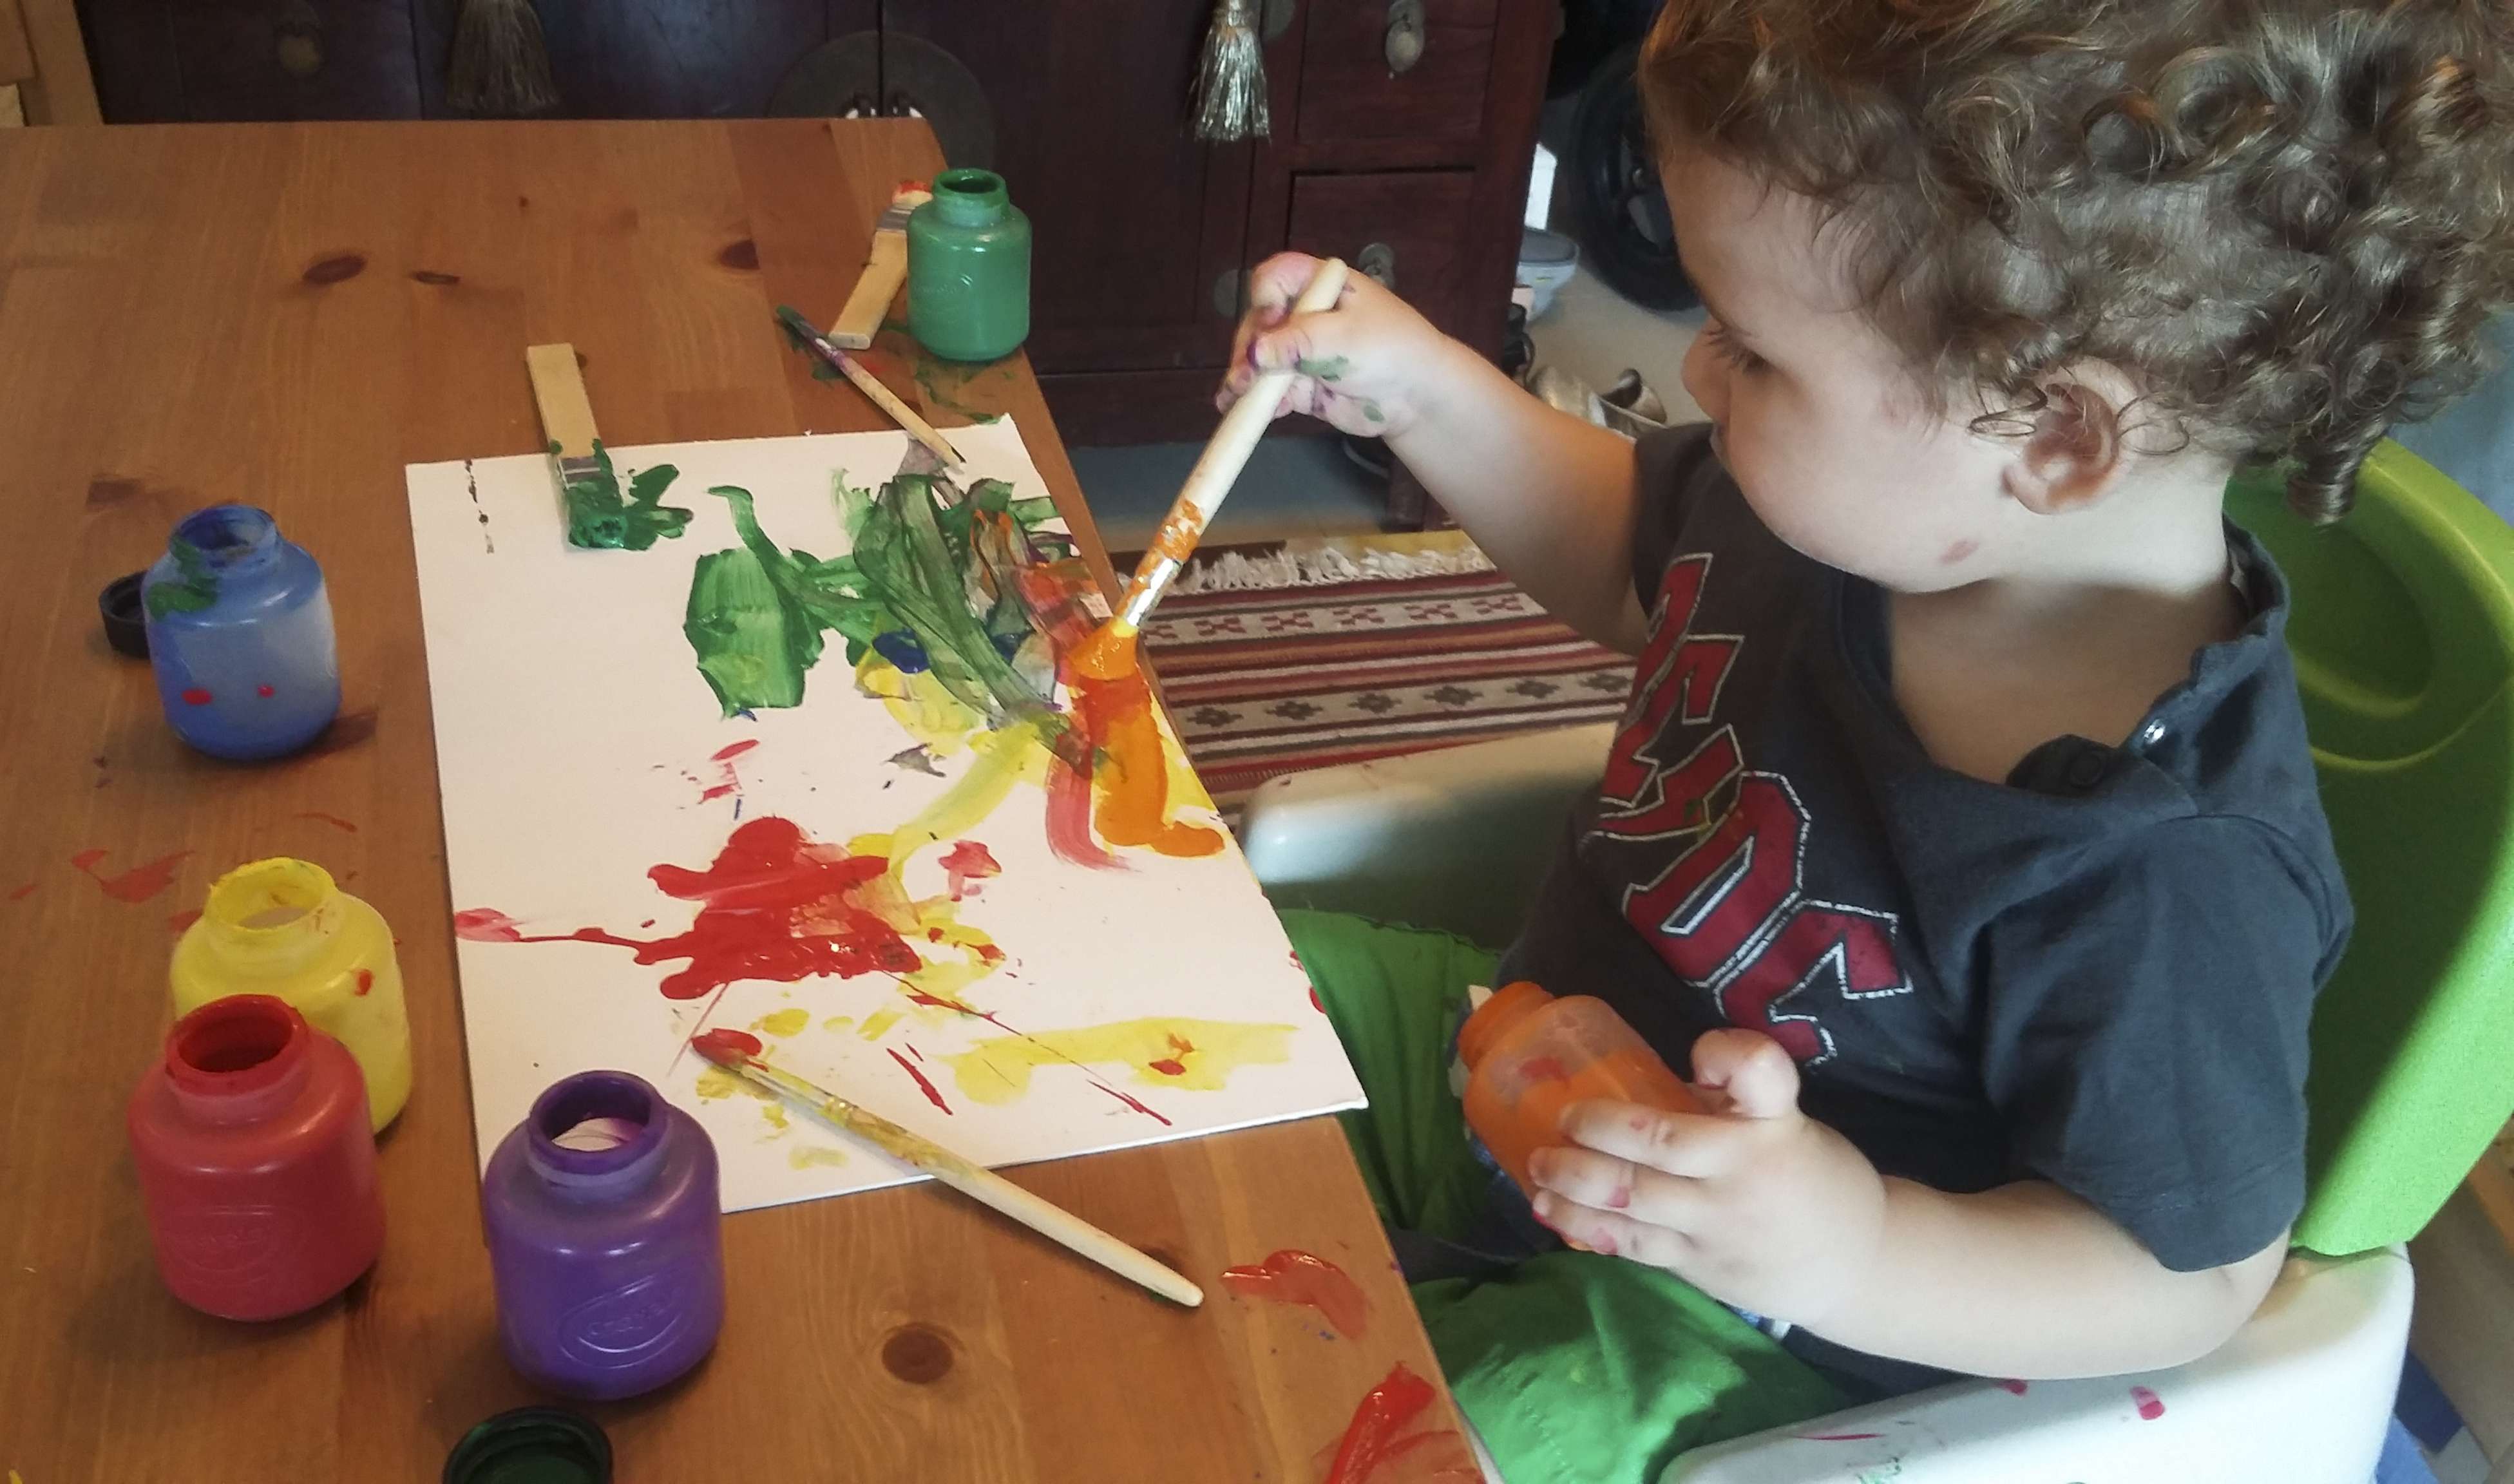 Leon, 18 months old, paints at home. We Play At Home maps out theme- and project-based activities for each child.